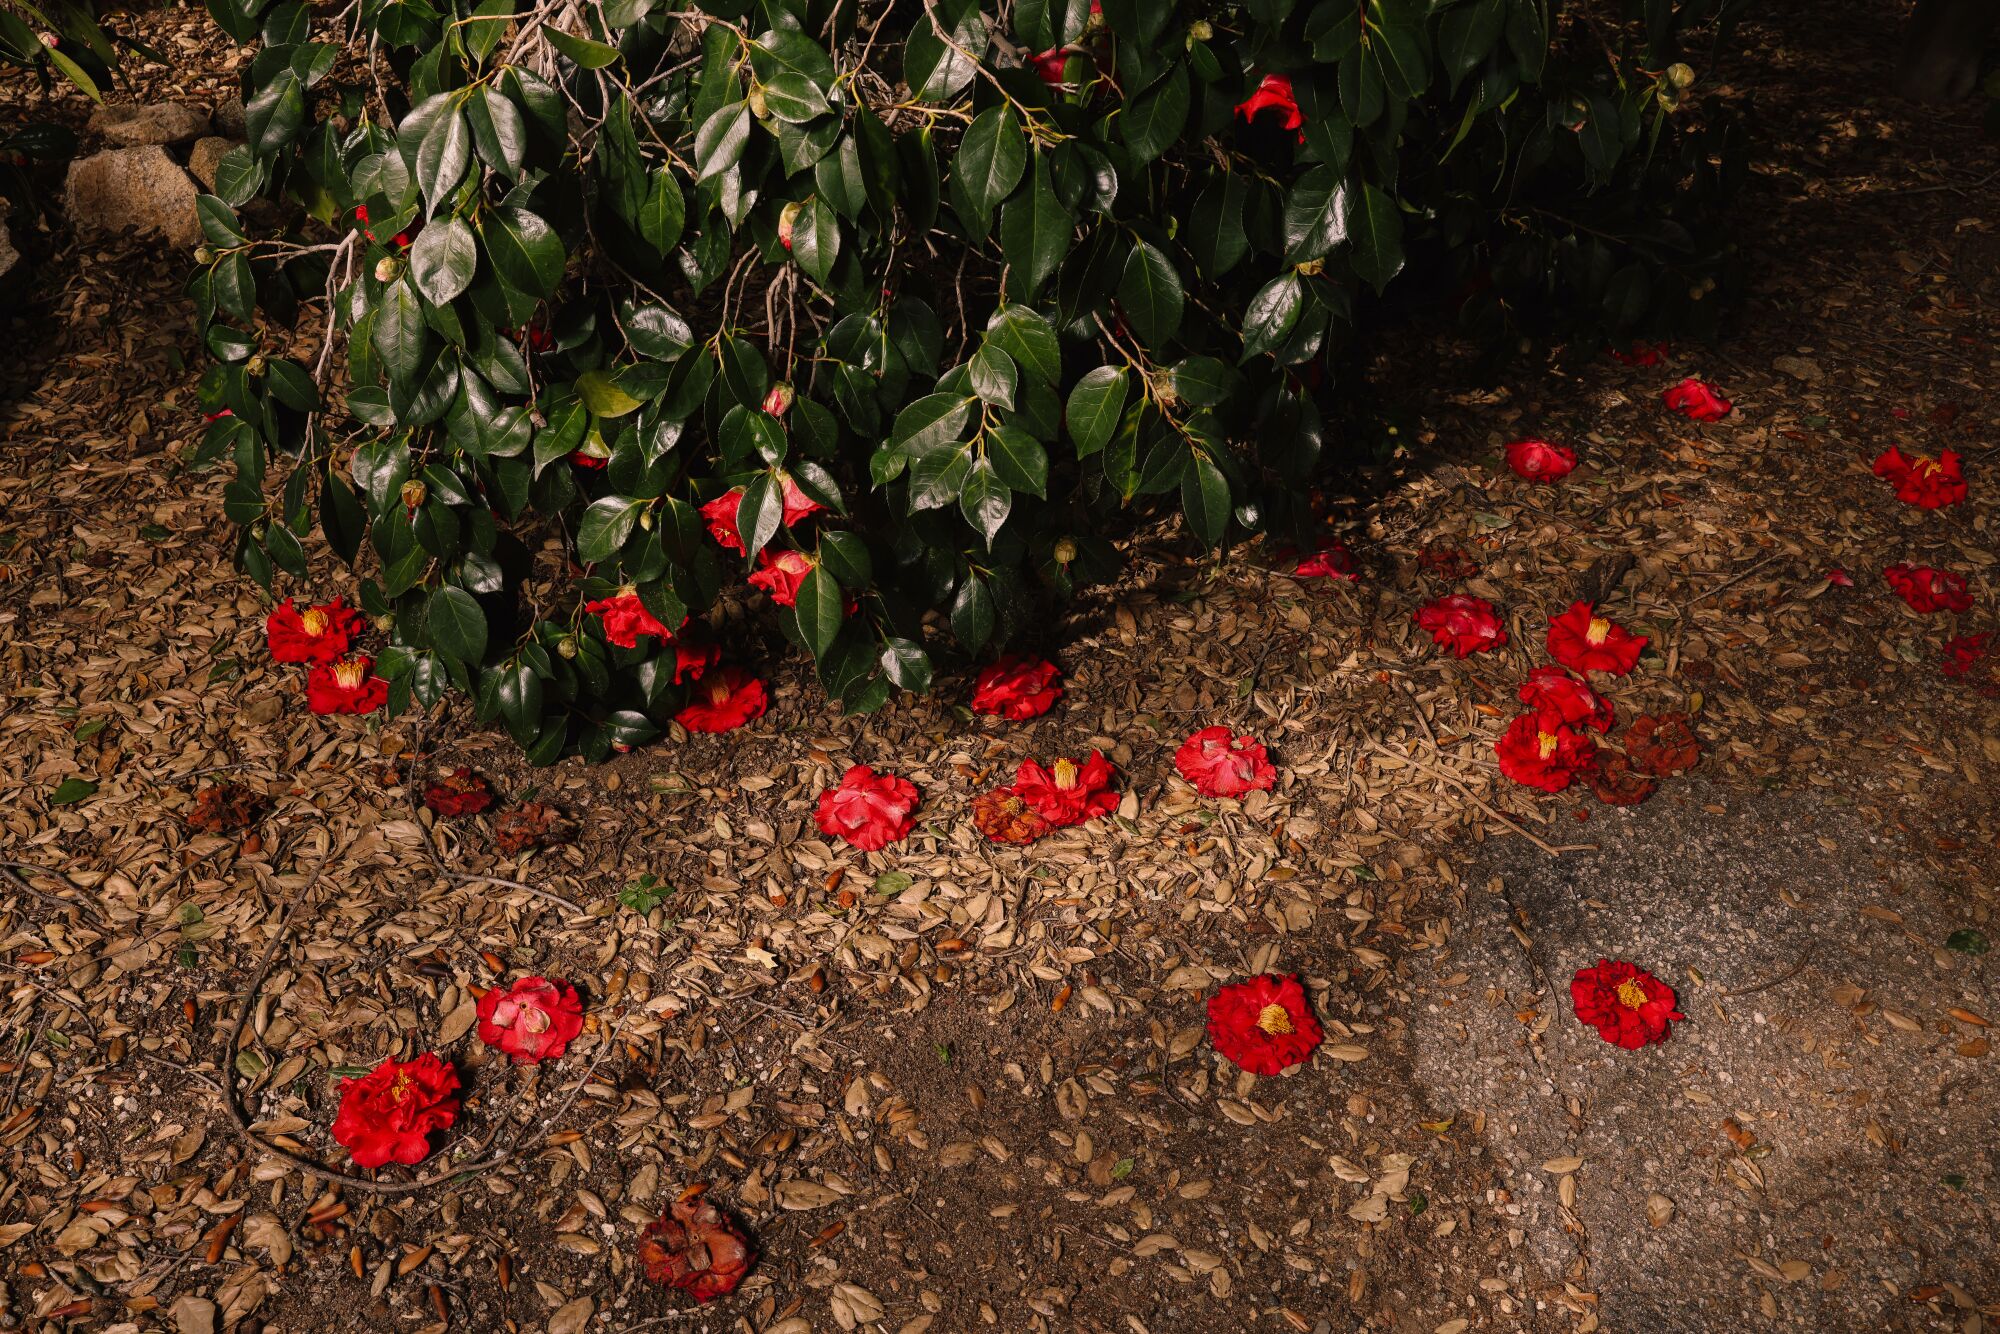 A camellia in bloom, with fallen flowers around it.